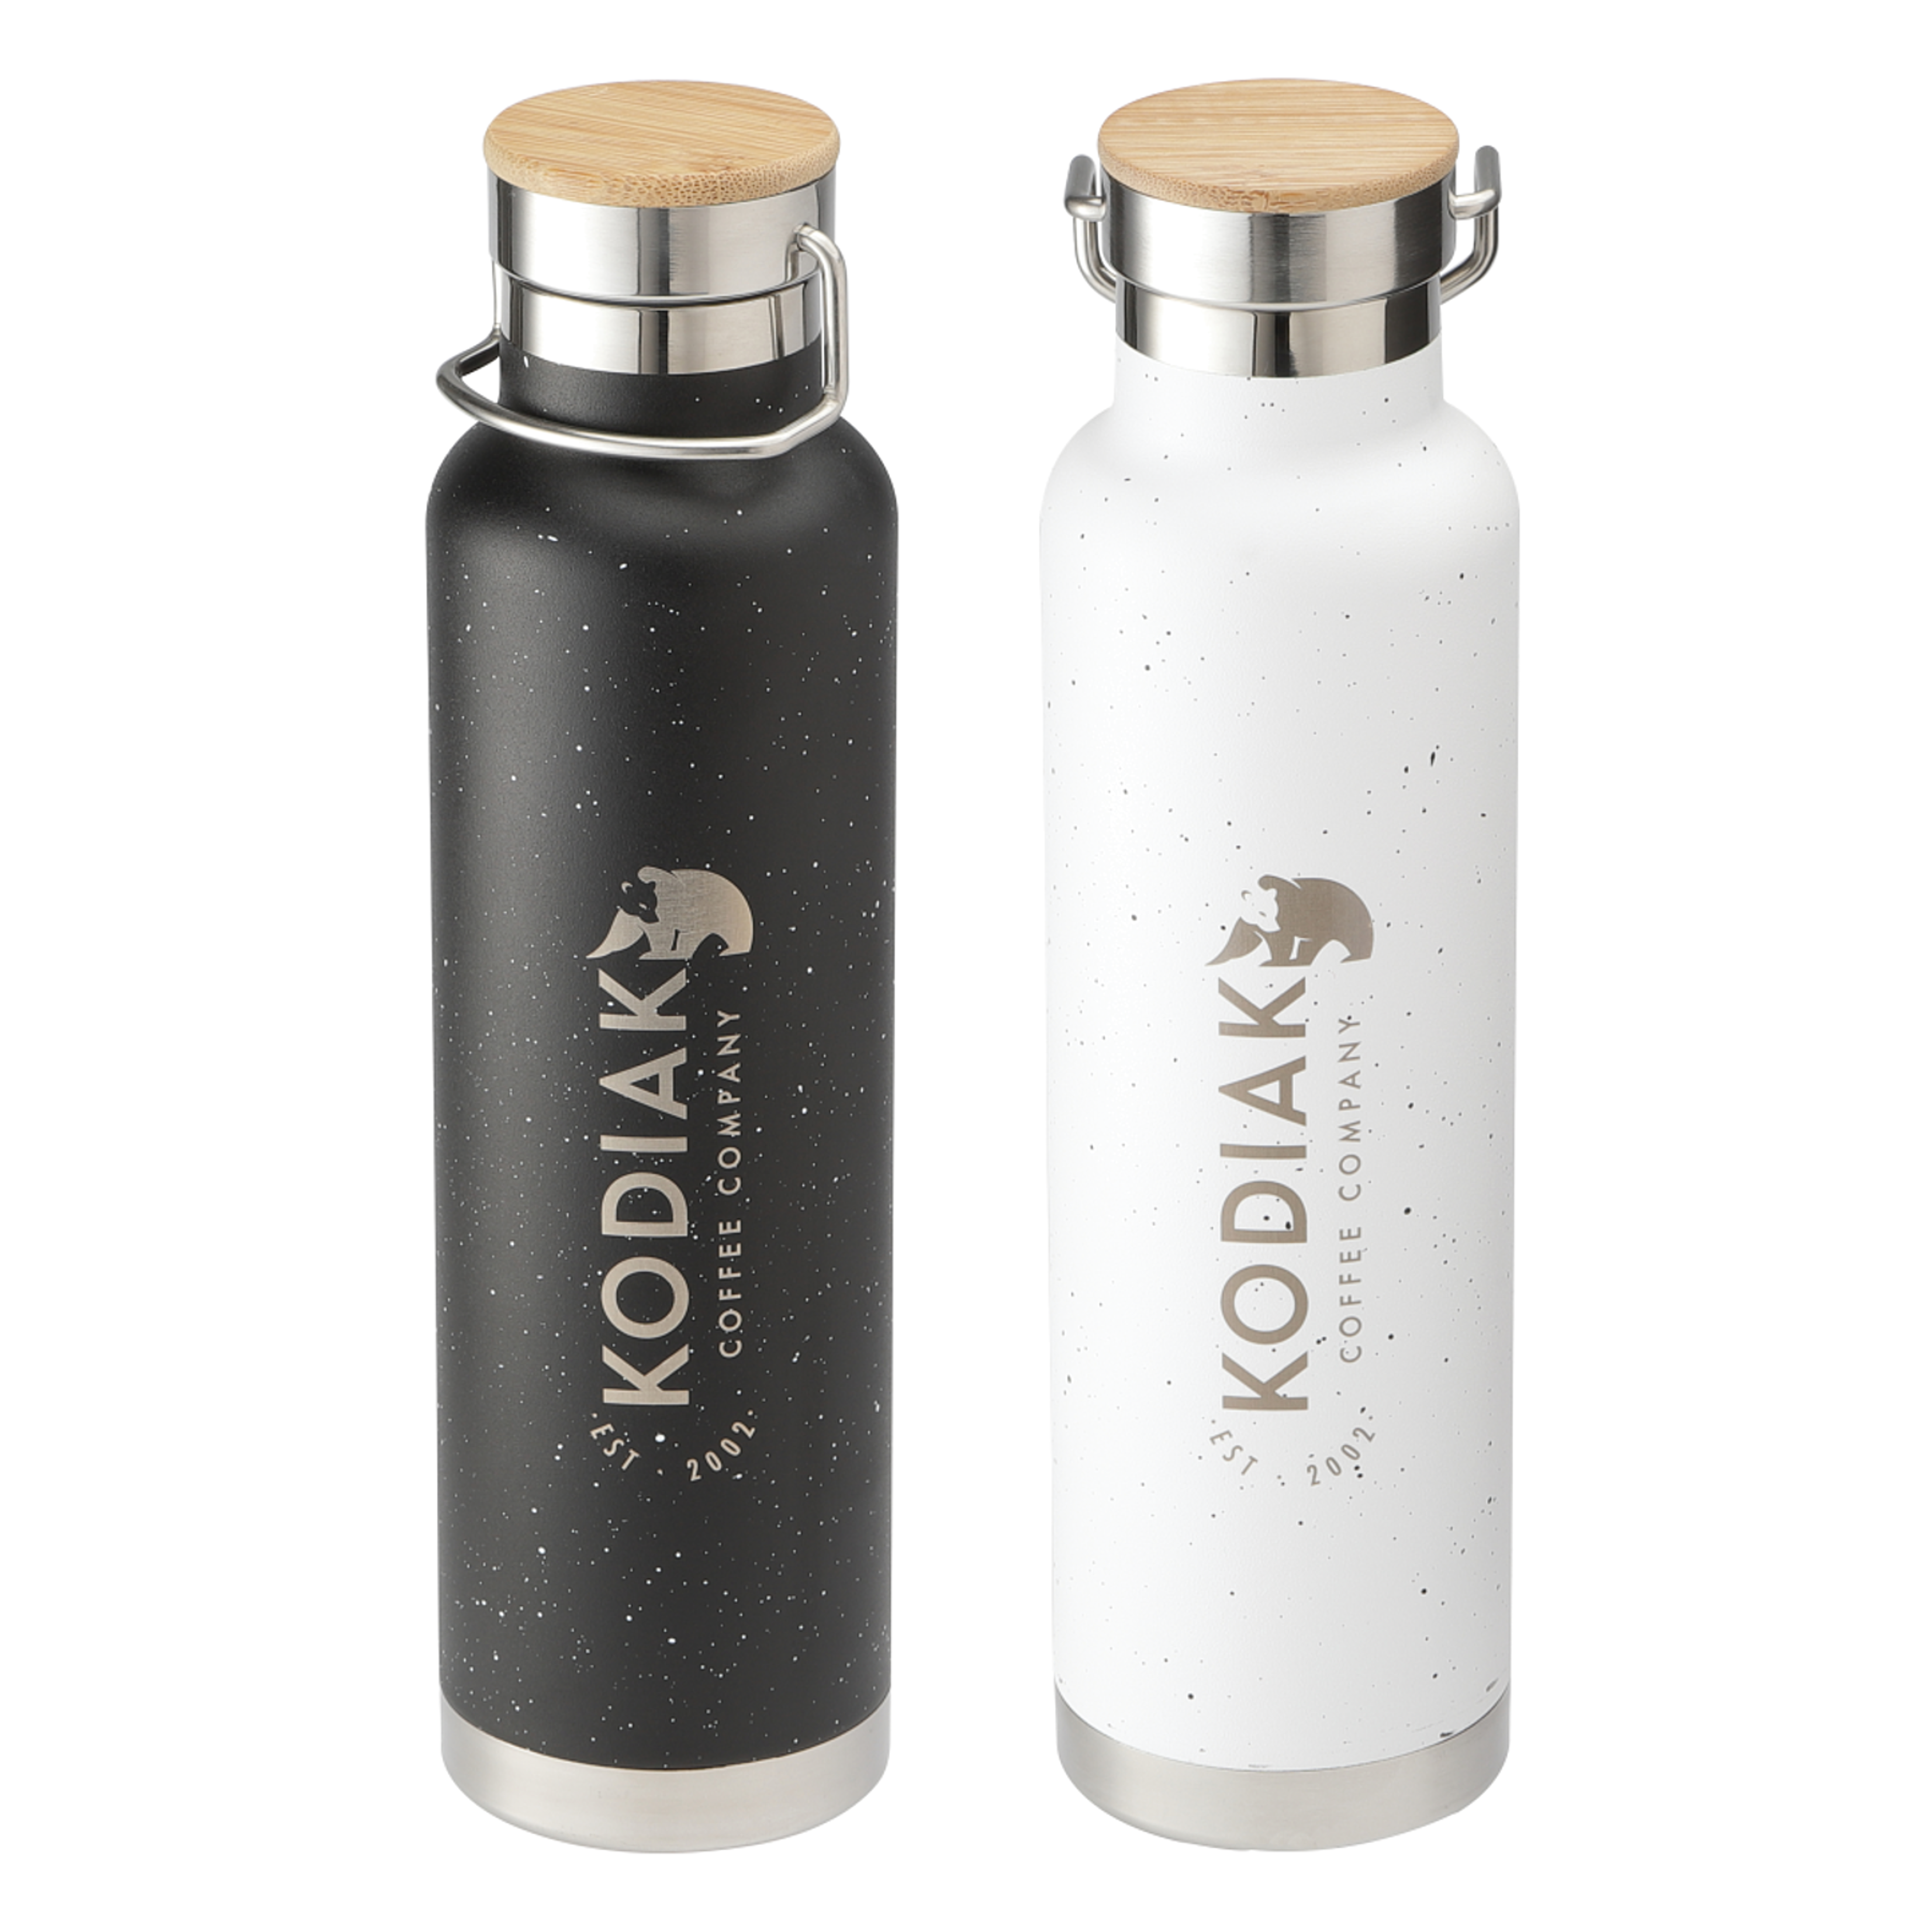 Speckled Stainless Copper Vacuum Insulated Bottle | 22 oz